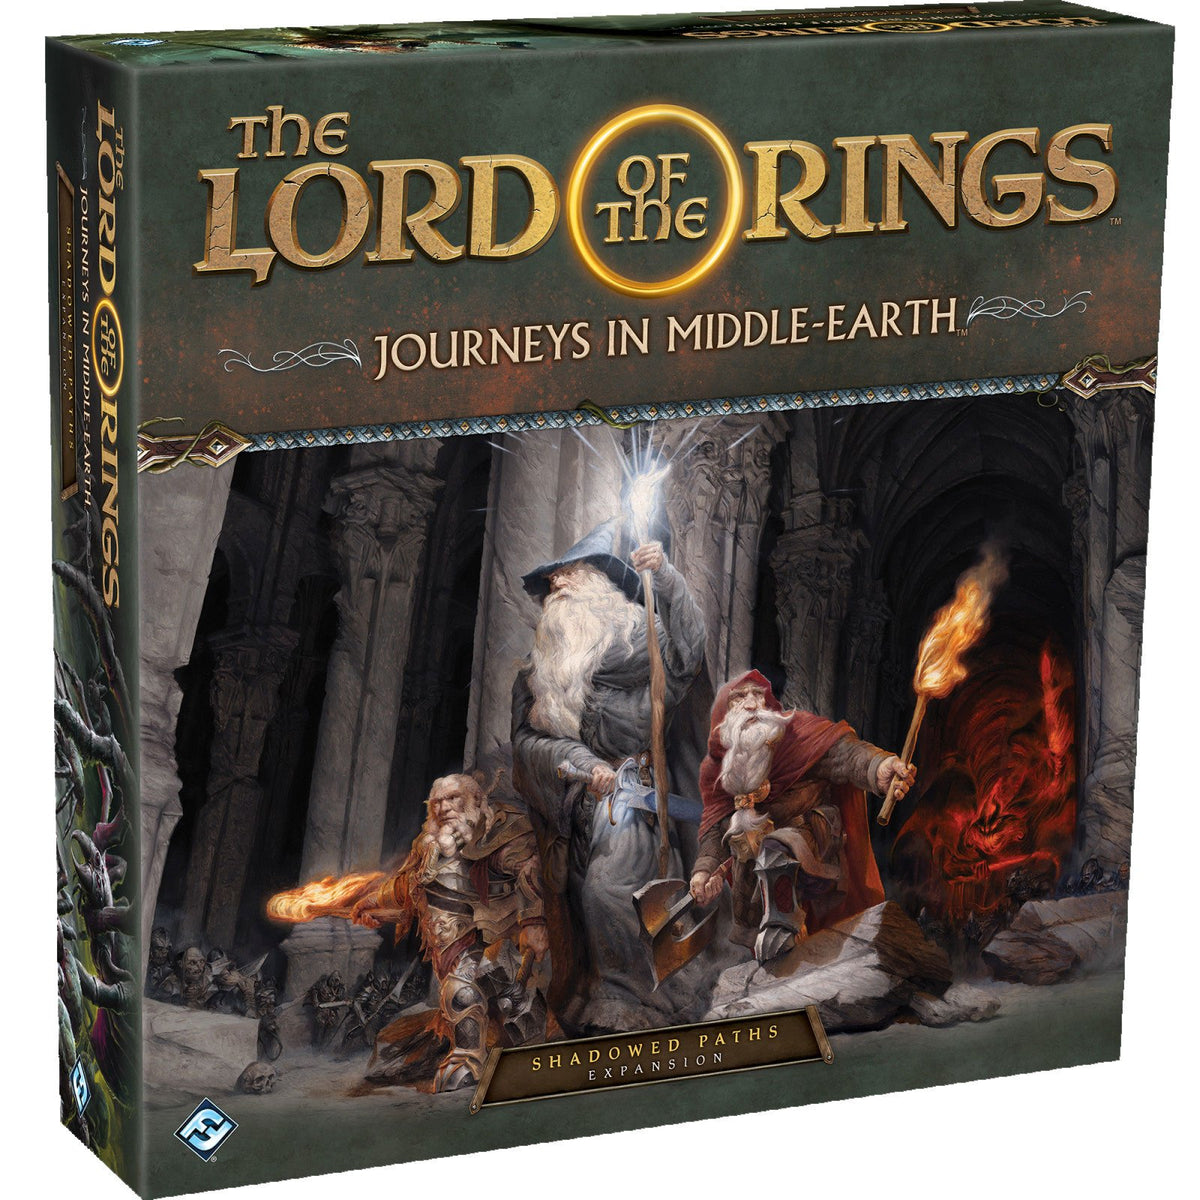 The Lord of the Rings: Journeys in Middle-Earth - Shadowed Paths (Expansion)